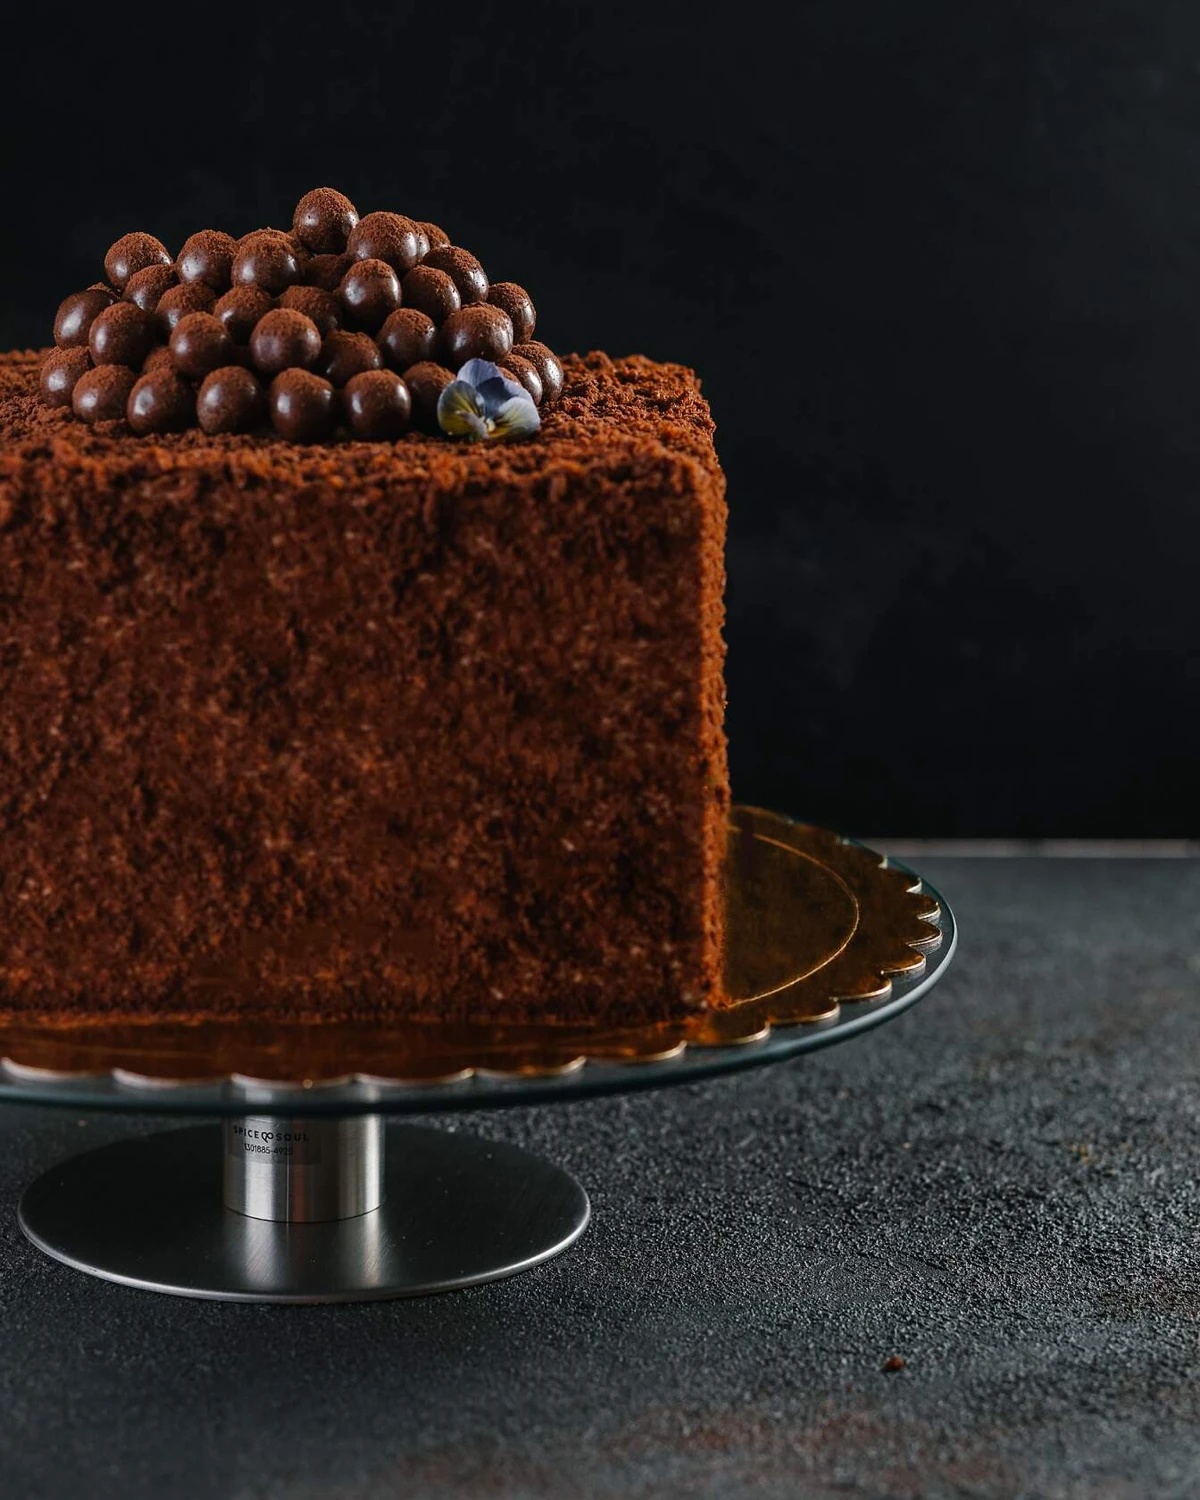 Biscuit chocolate honey cake . On a dark background, there is a square cake on a cake stand. It is decorated with chocolate balls and violet flowers.